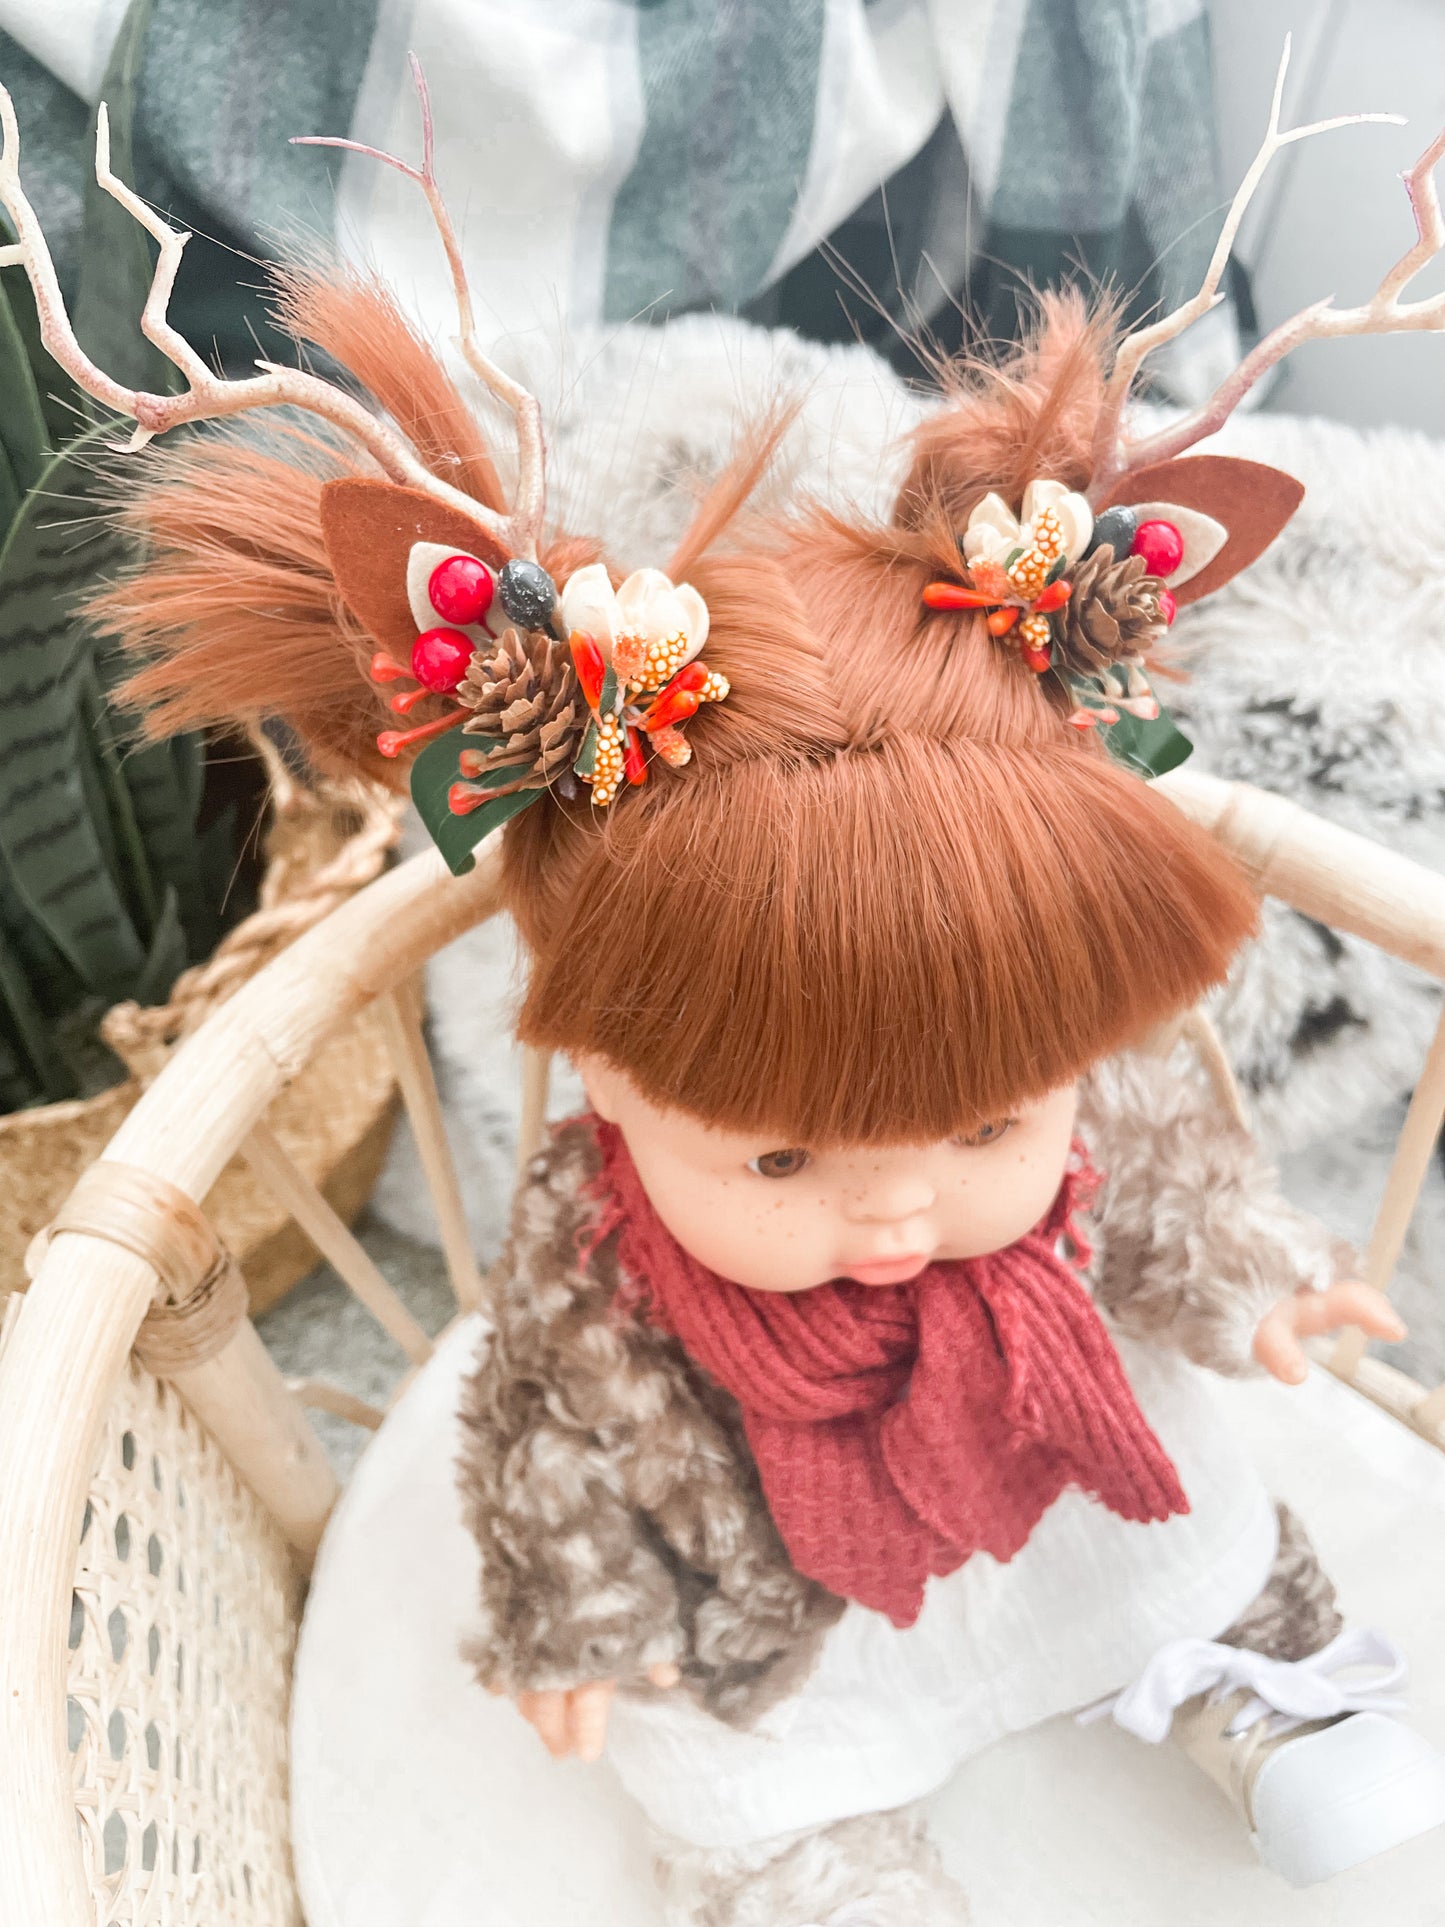 Raphaelle With Rudolph Inspired Outfit- Minikane Girl Doll - OOAK